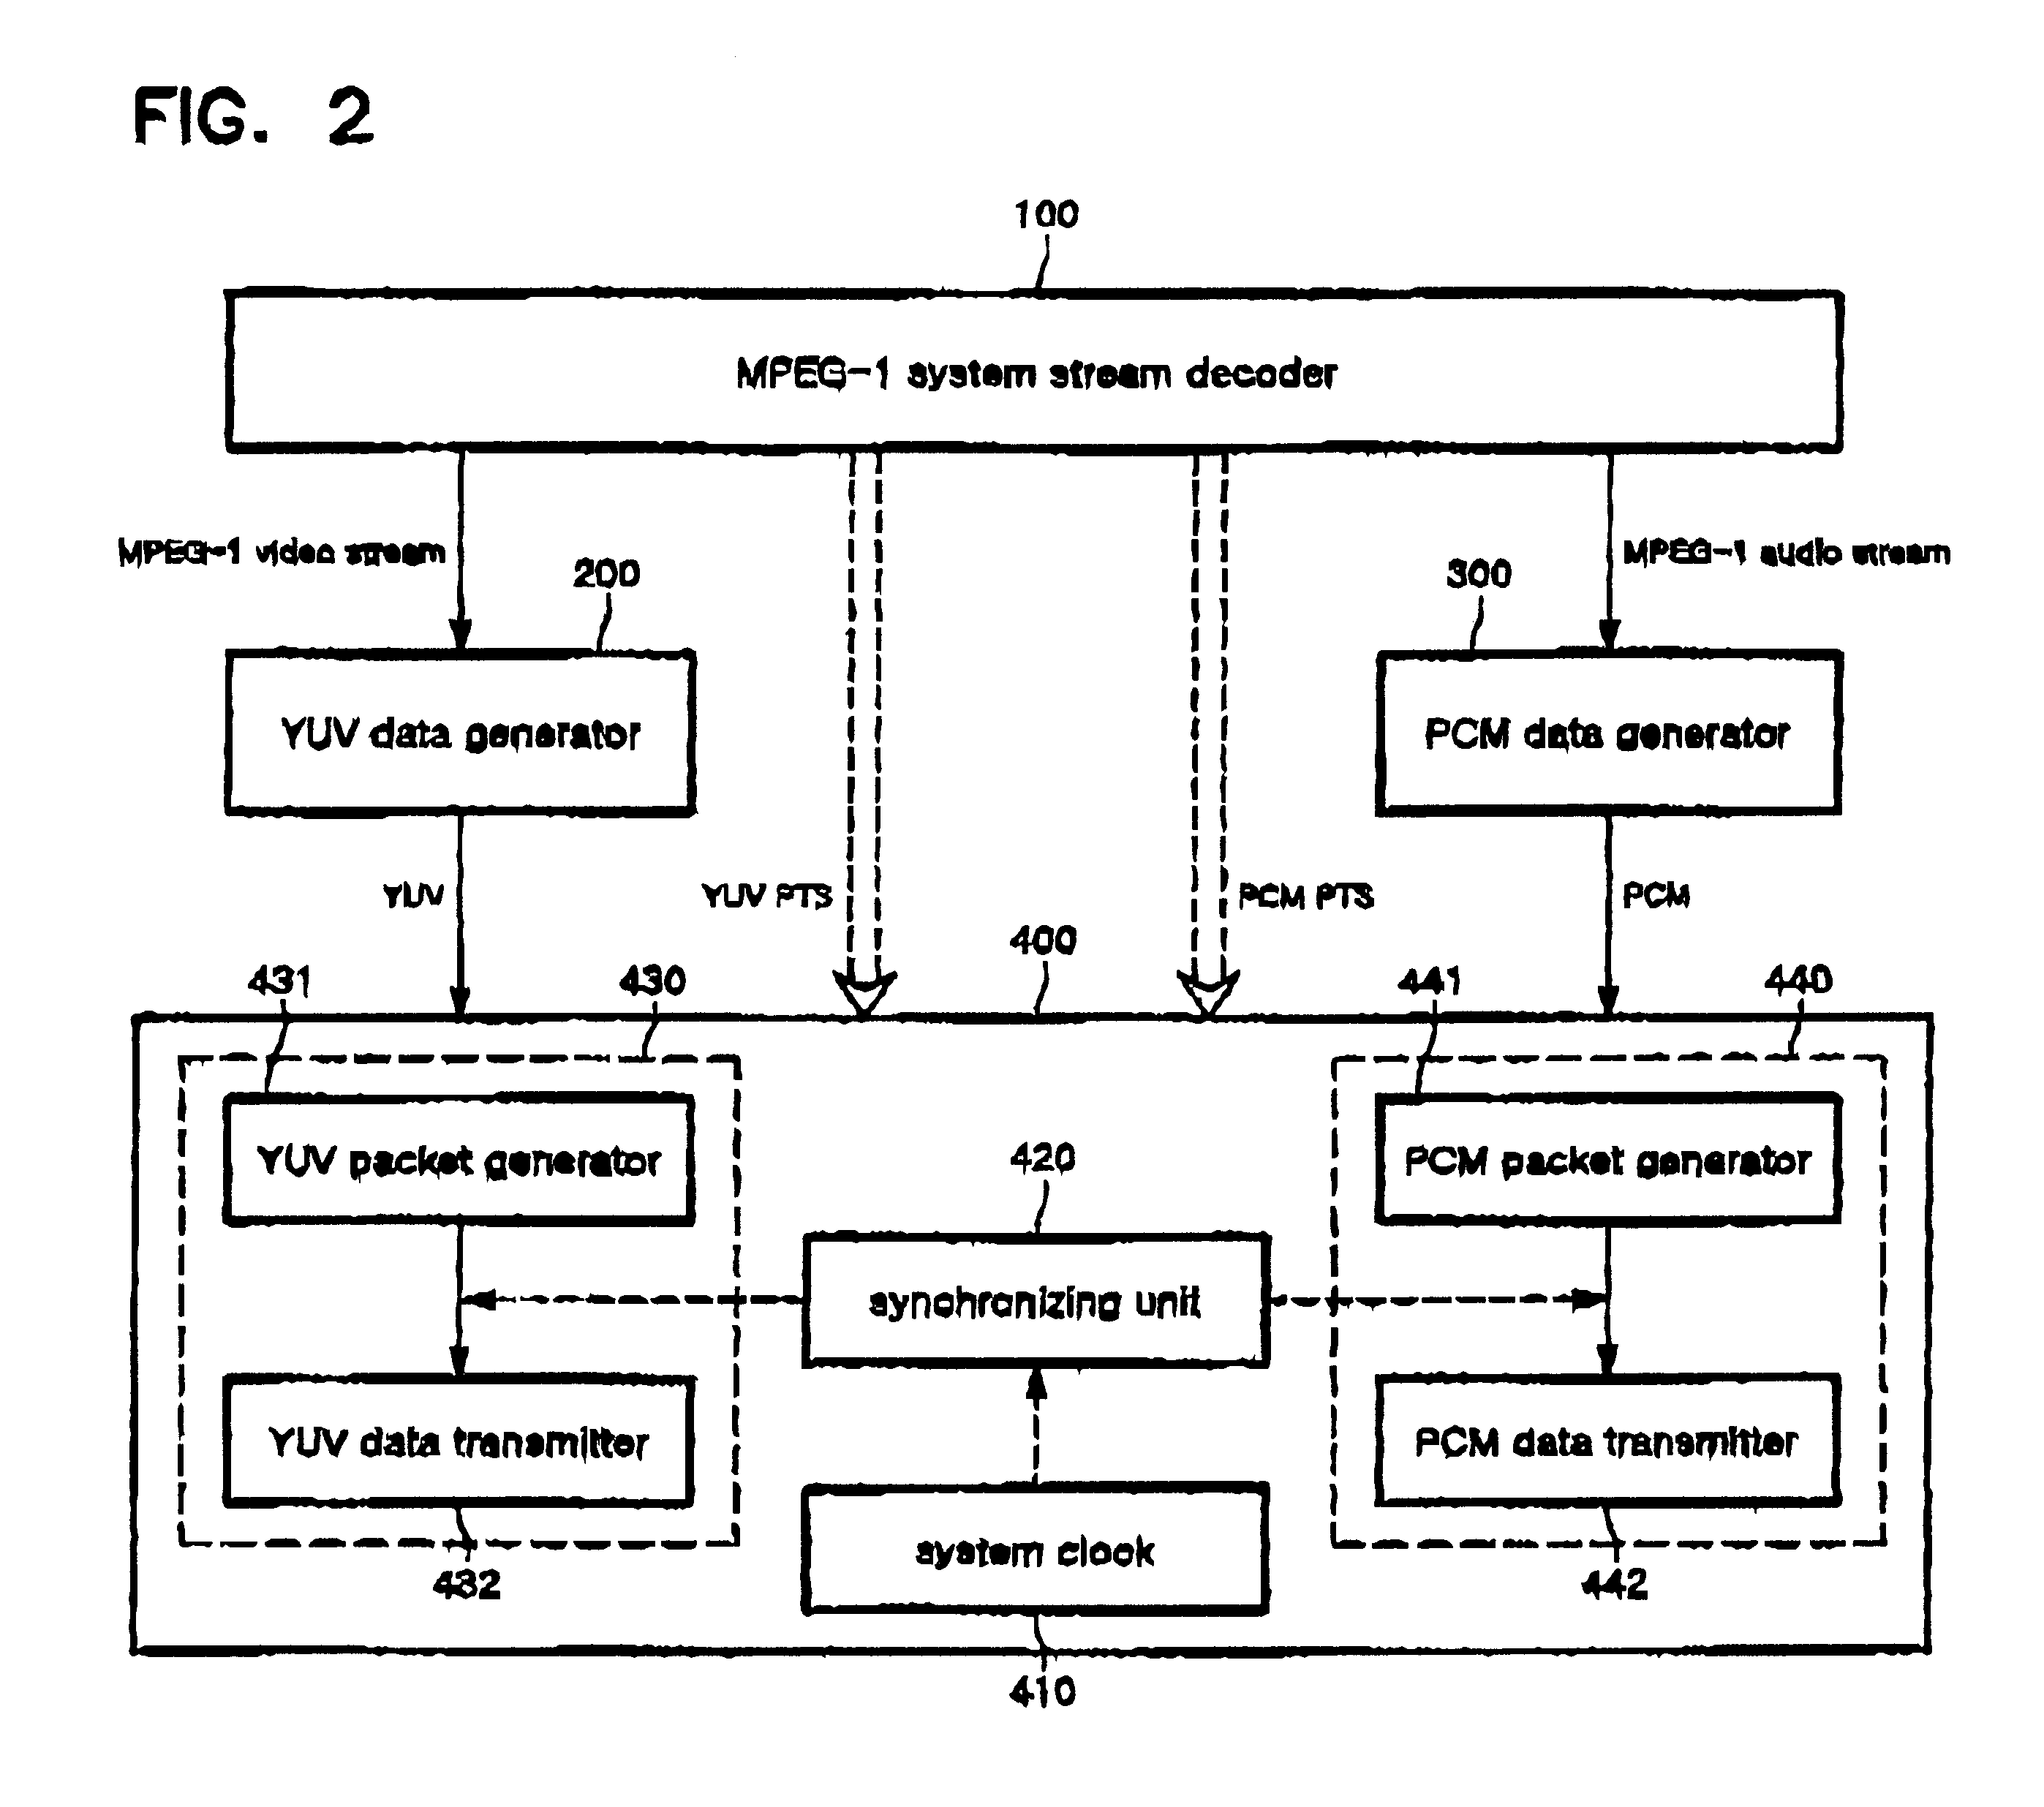 Apparatus and method for streaming MPEG-1 data